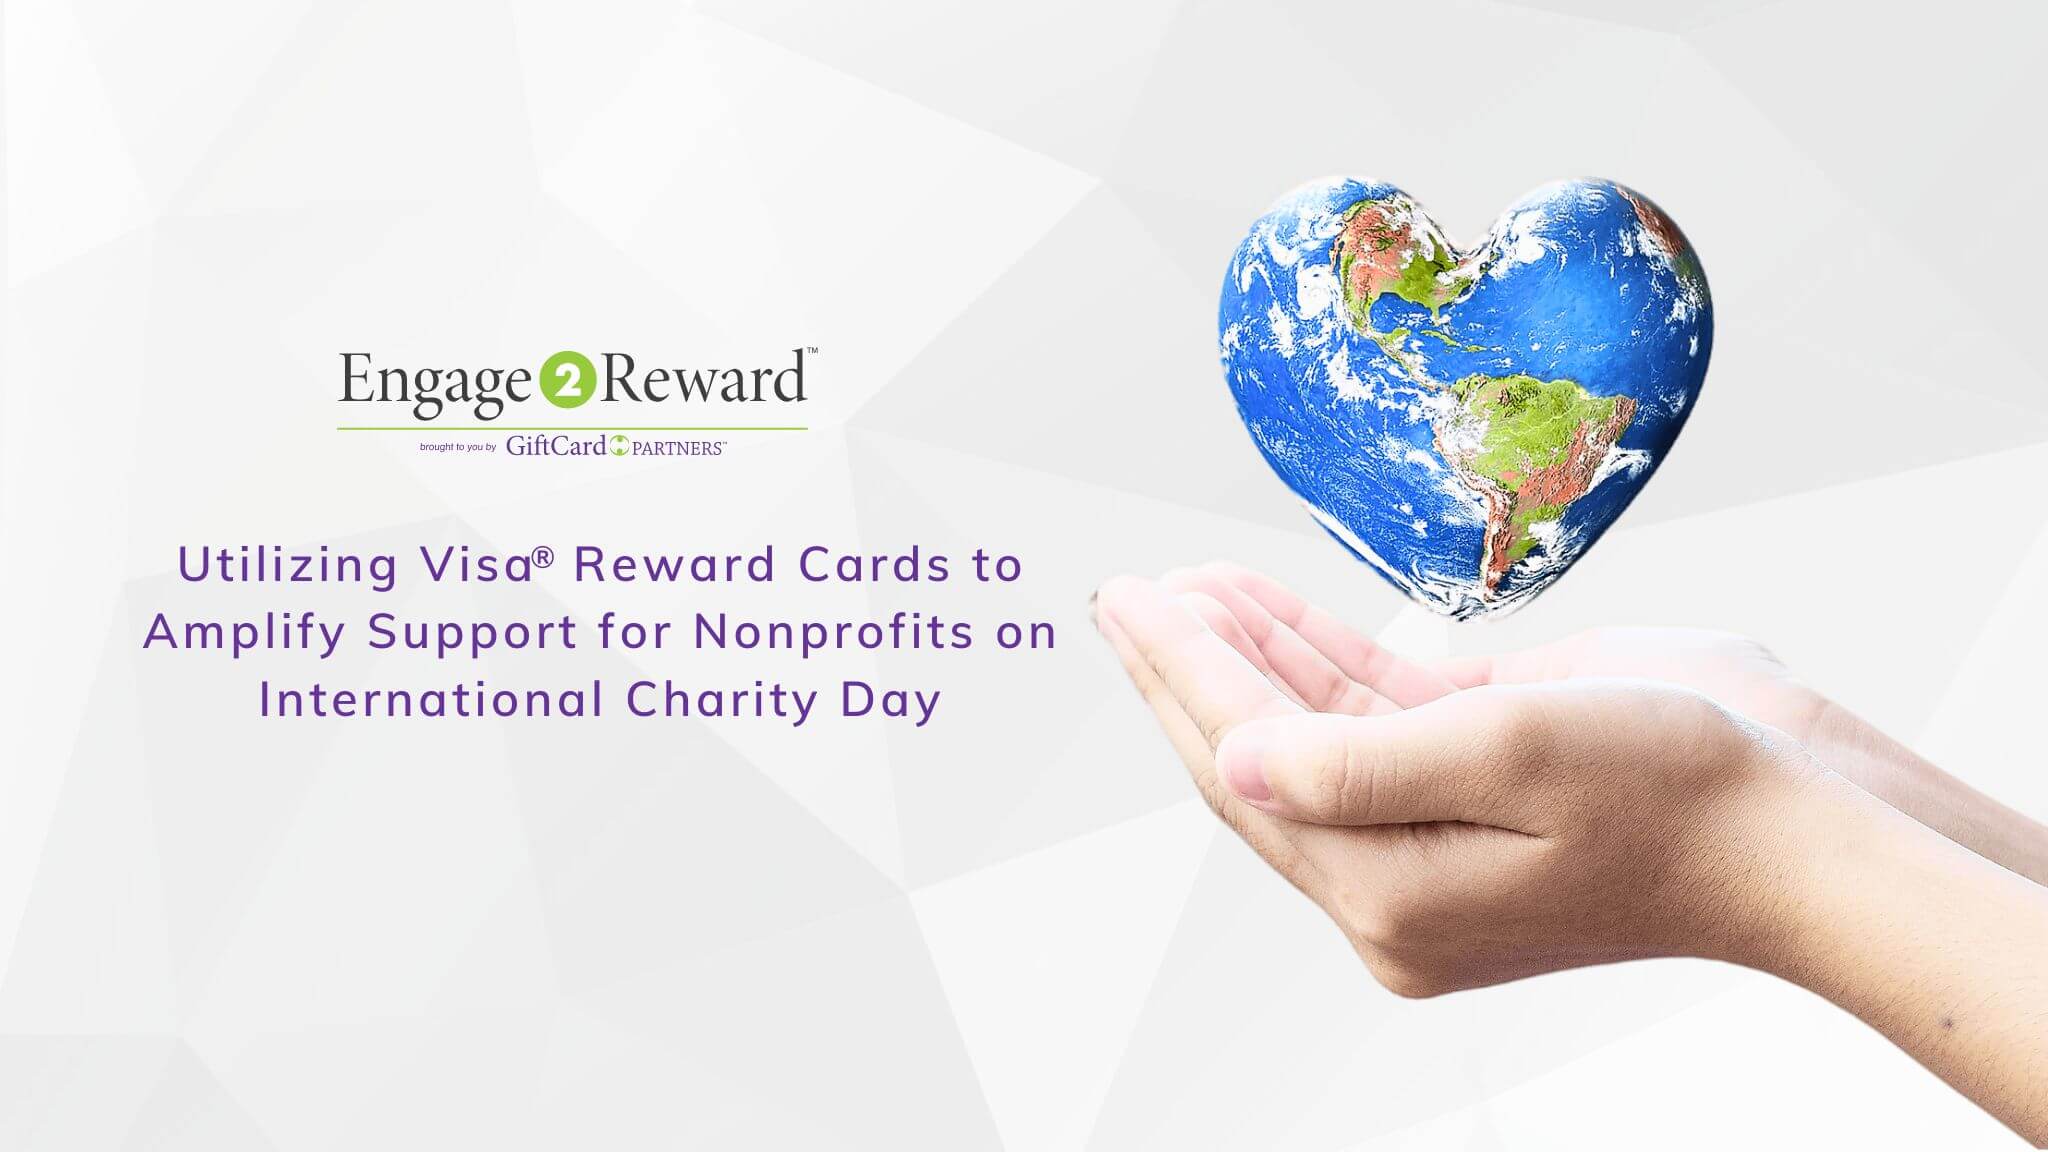 Utilizing Visa® Reward Cards to Amplify Support for Nonprofits on International Charity Day